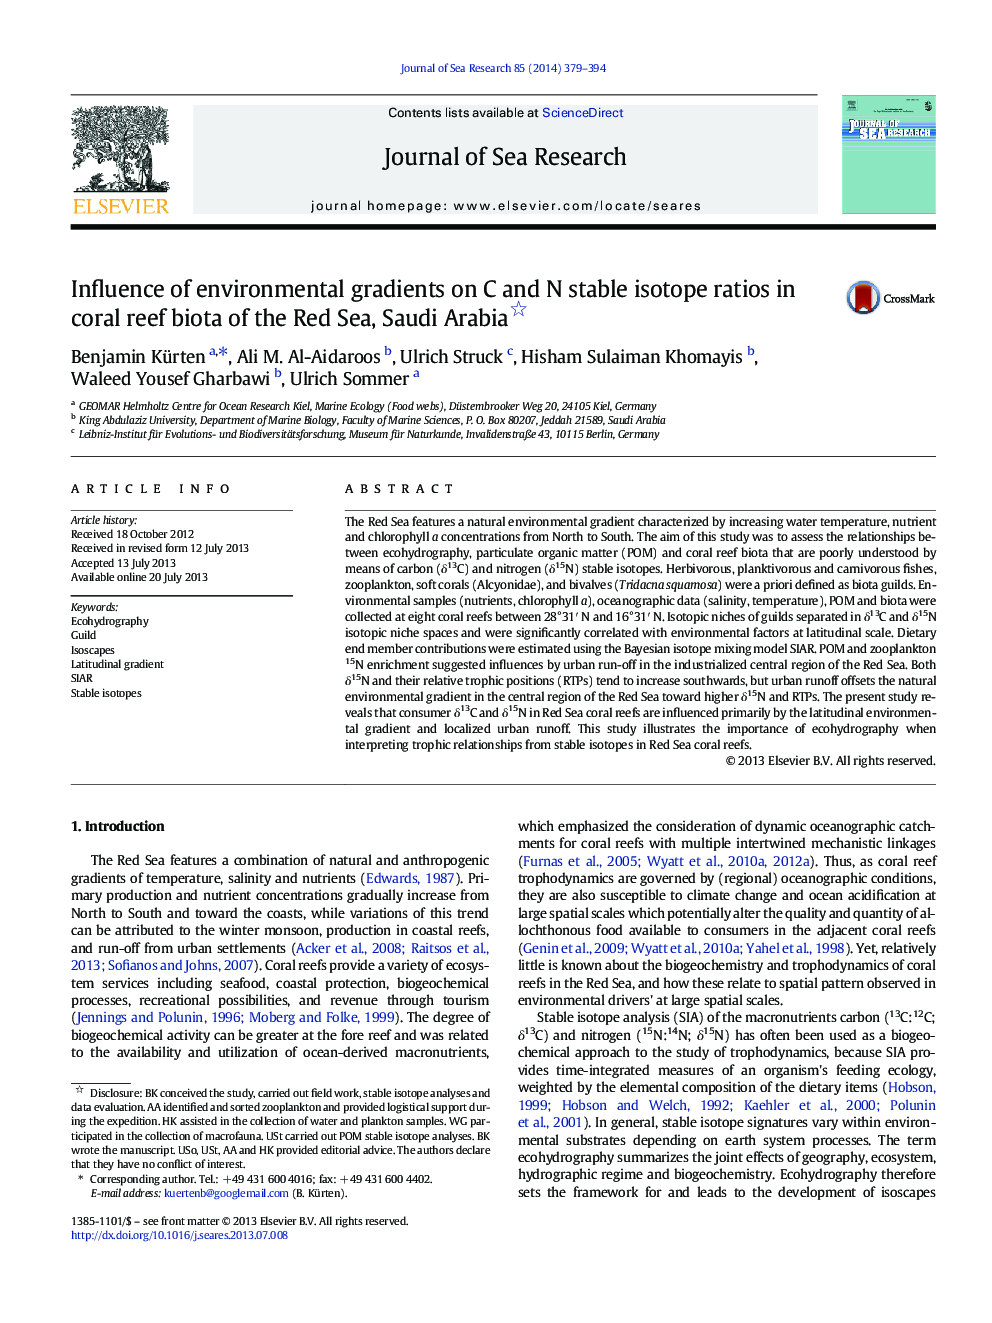 Influence of environmental gradients on C and N stable isotope ratios in coral reef biota of the Red Sea, Saudi Arabia